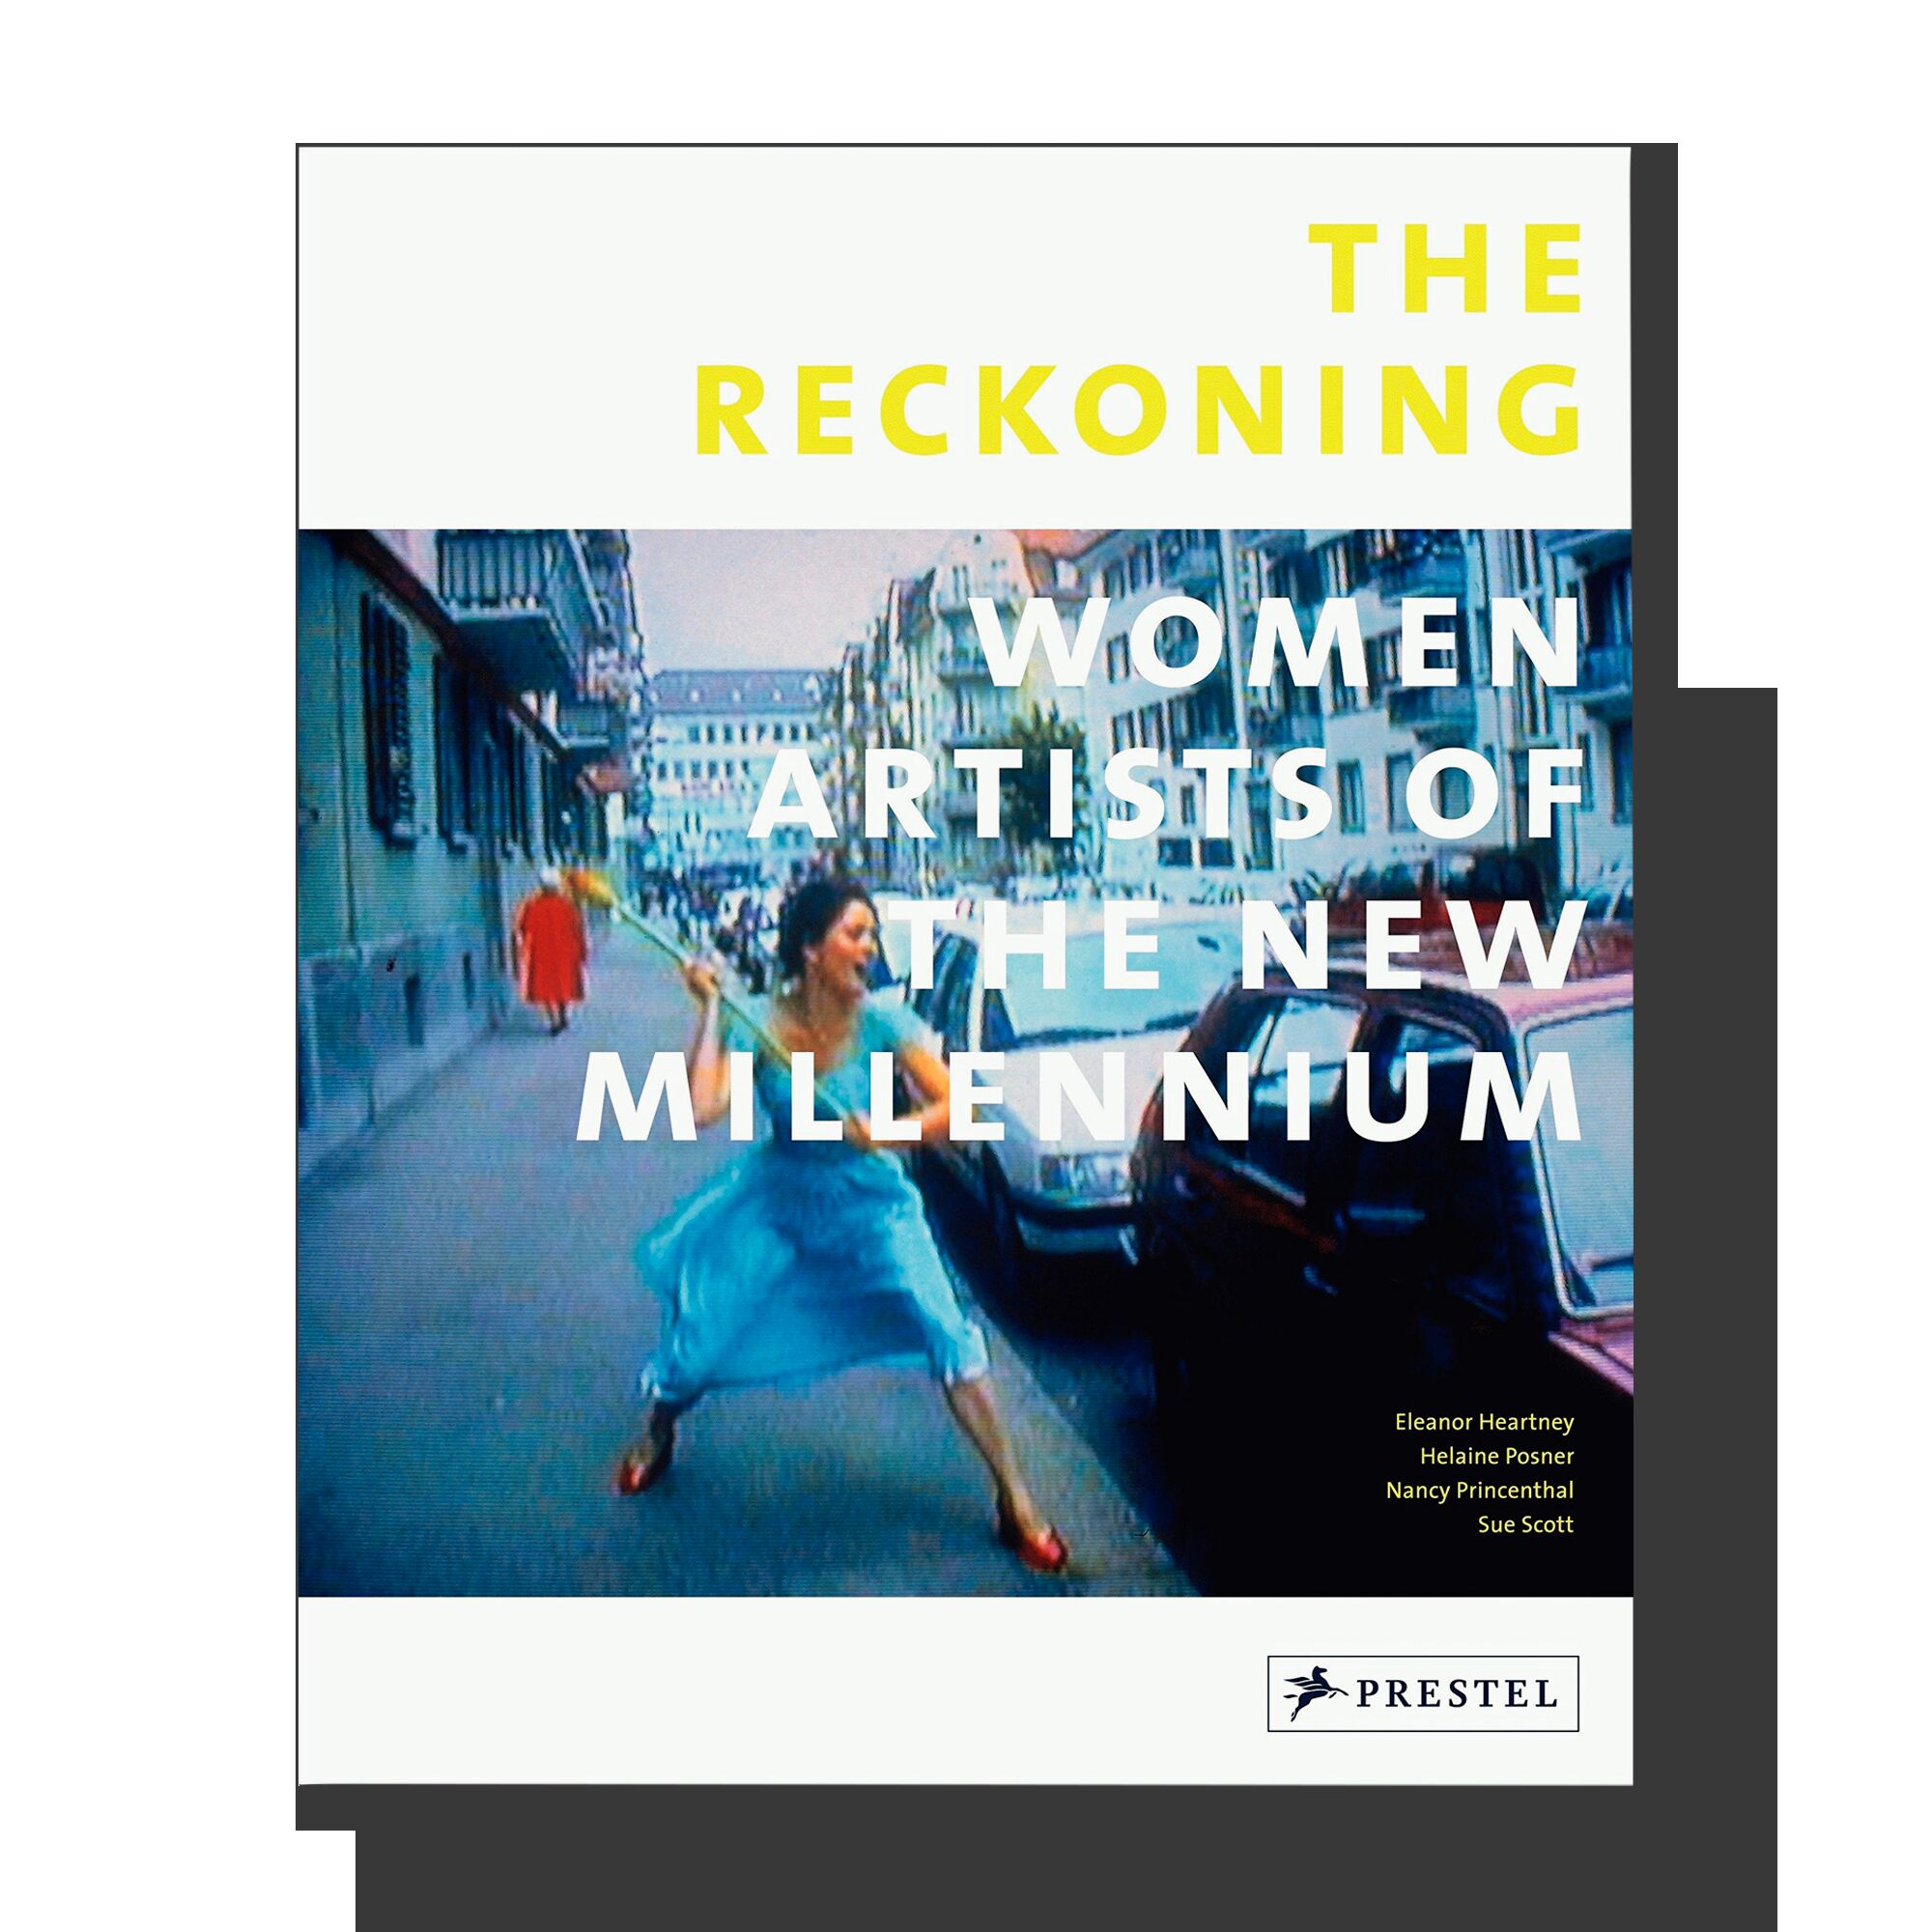 The Reckoning: Women Artists of the New Millennium